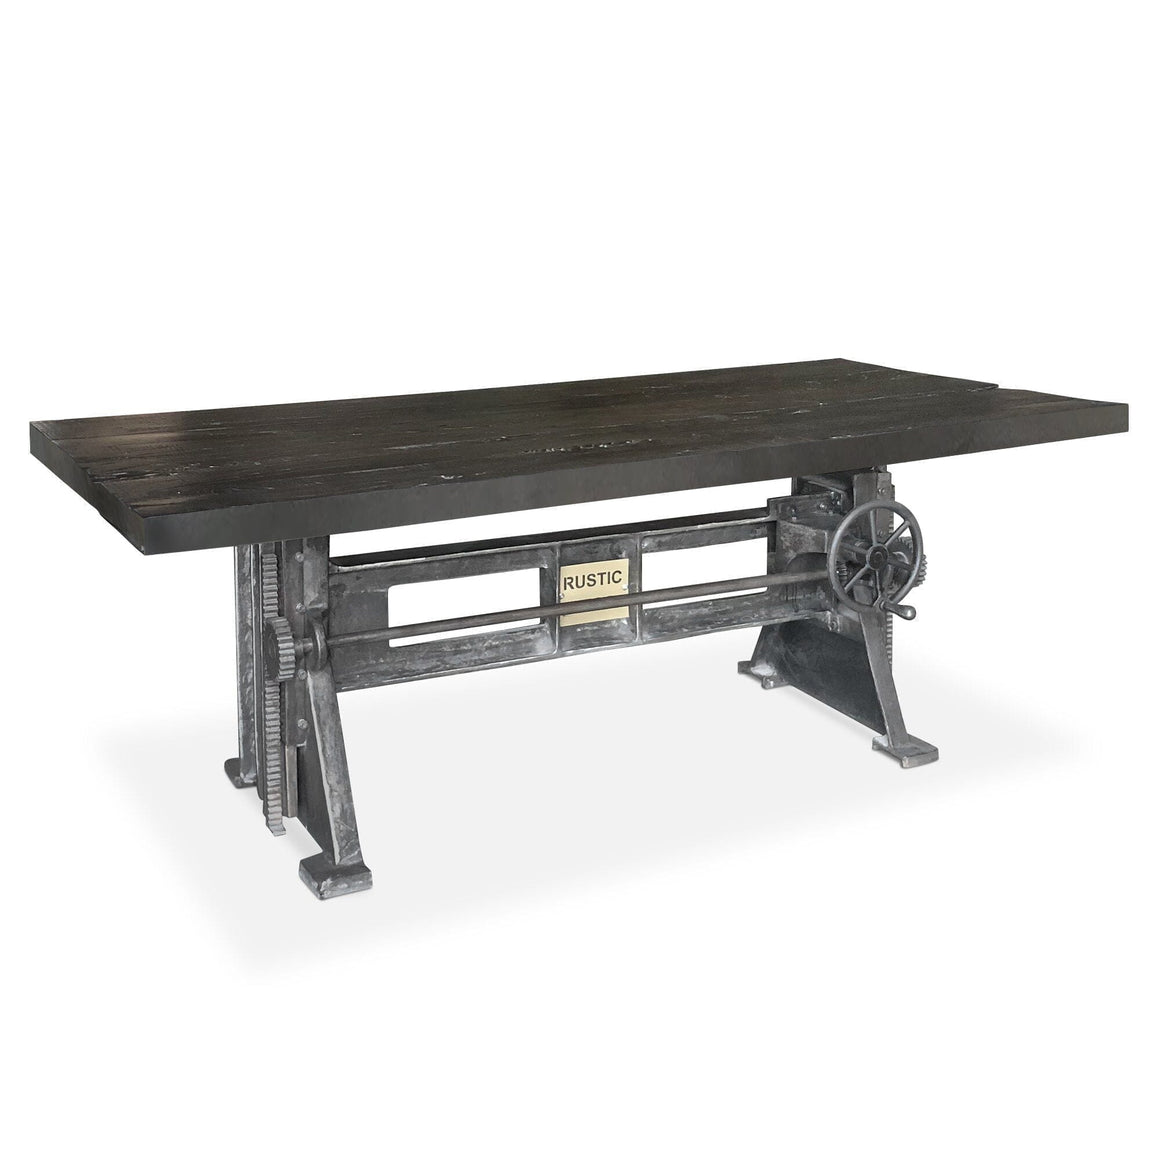 Craftsman Industrial Dining Table - Adjustable Height Iron Base - Rustic Ebony - Rustic Deco Incorporated